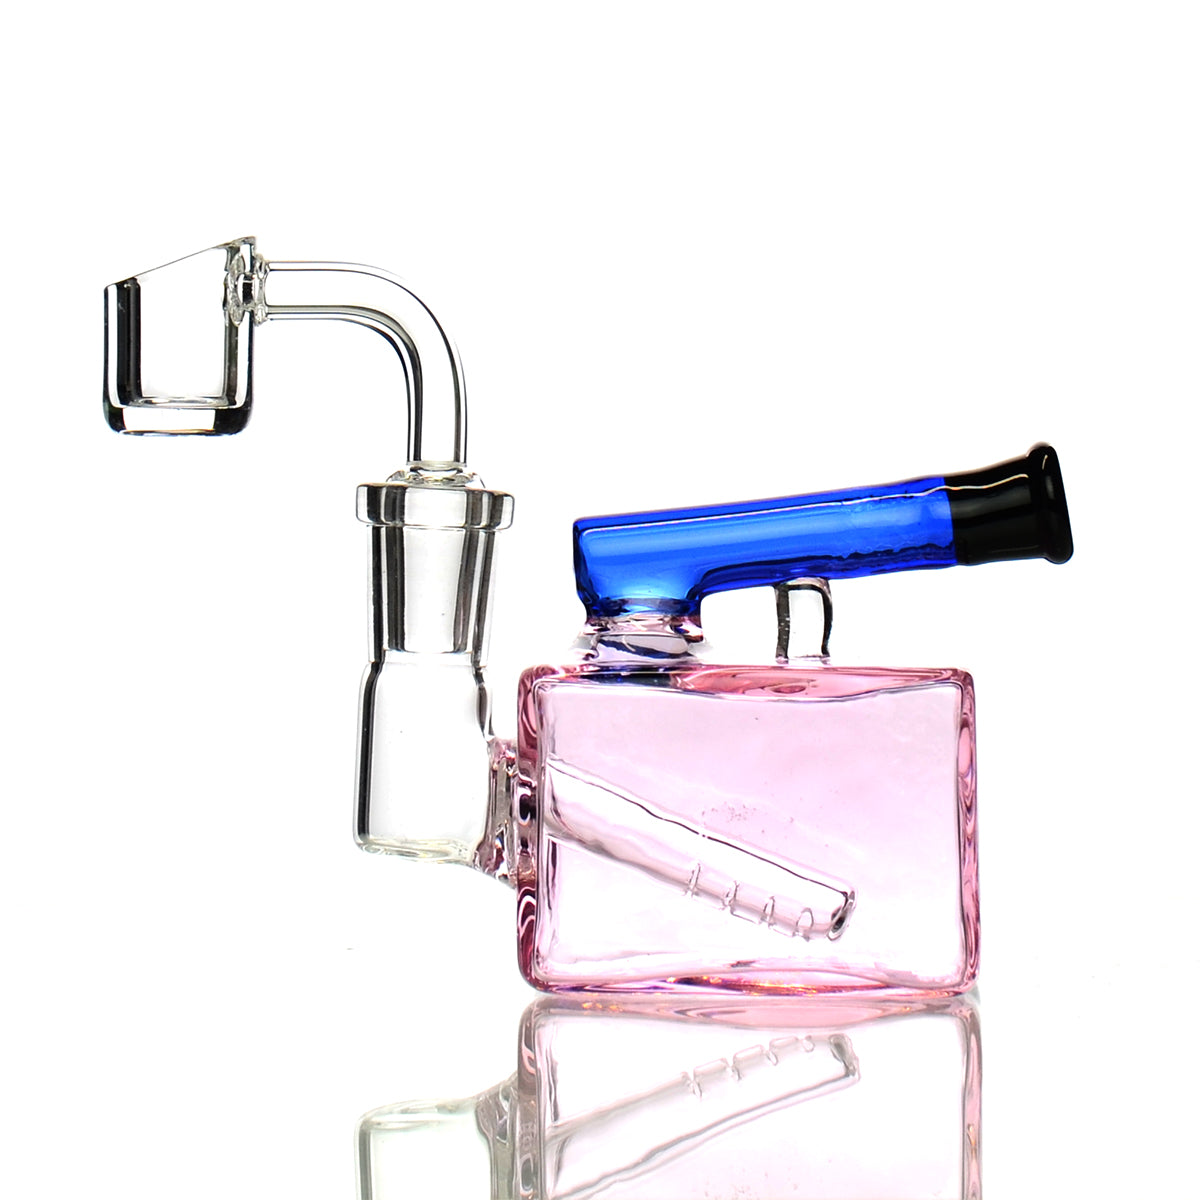 5" Cubic Color Tube Water Pipe Rig with 14mm Male Banger